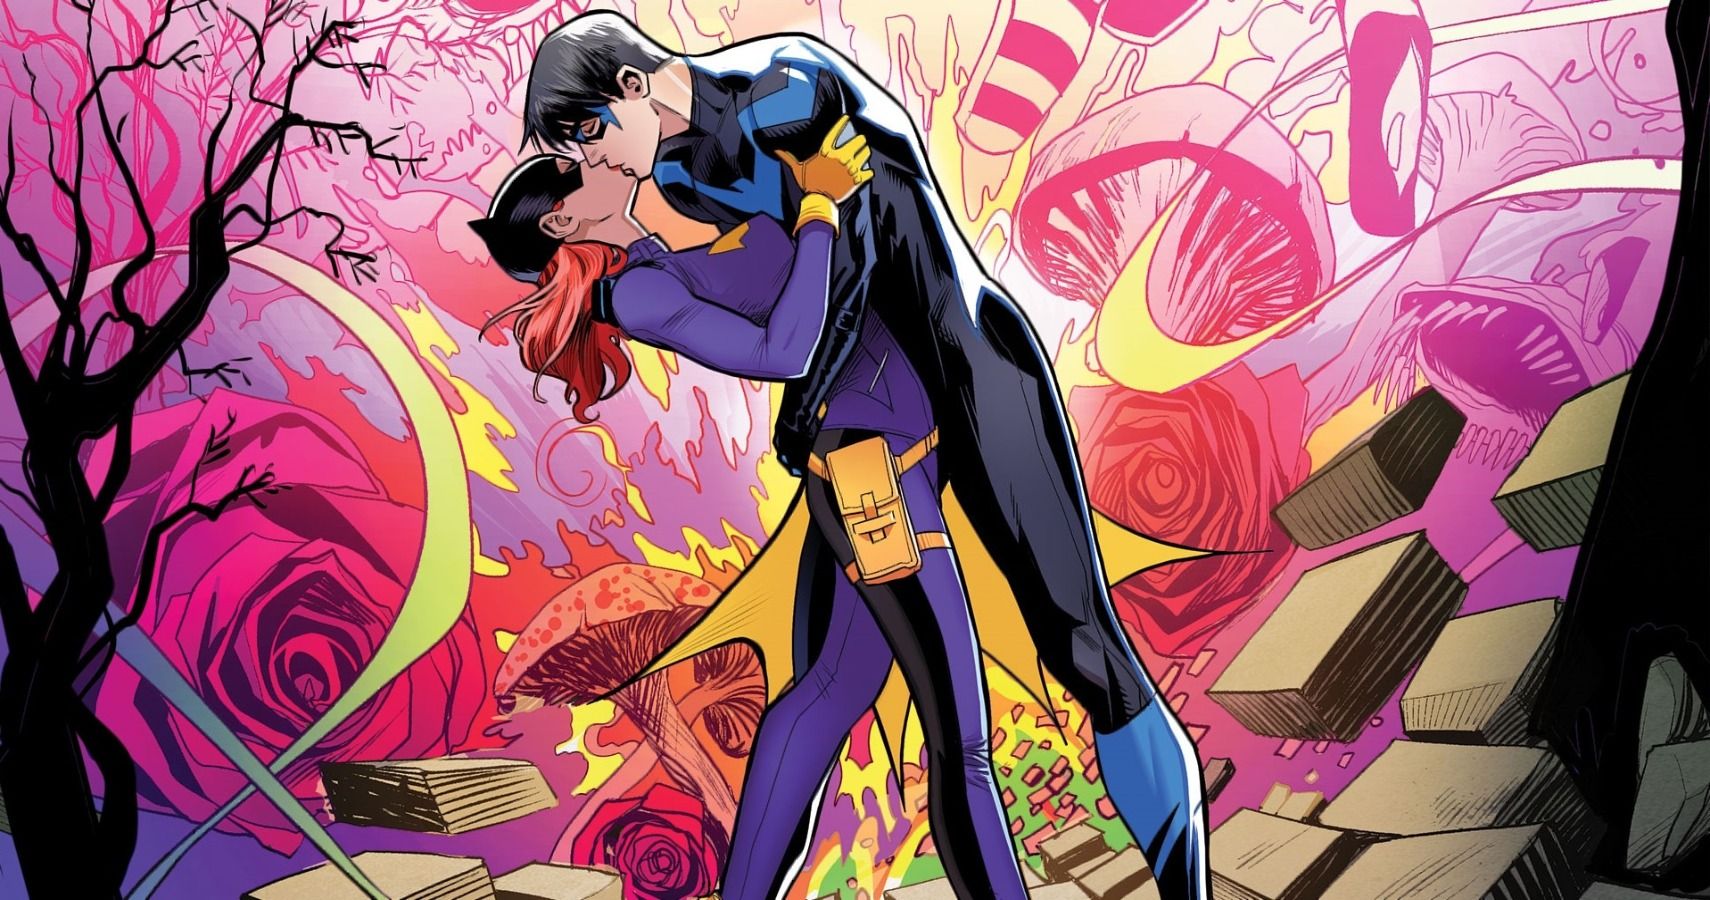 Of The Most Confusing Relationships In Comics